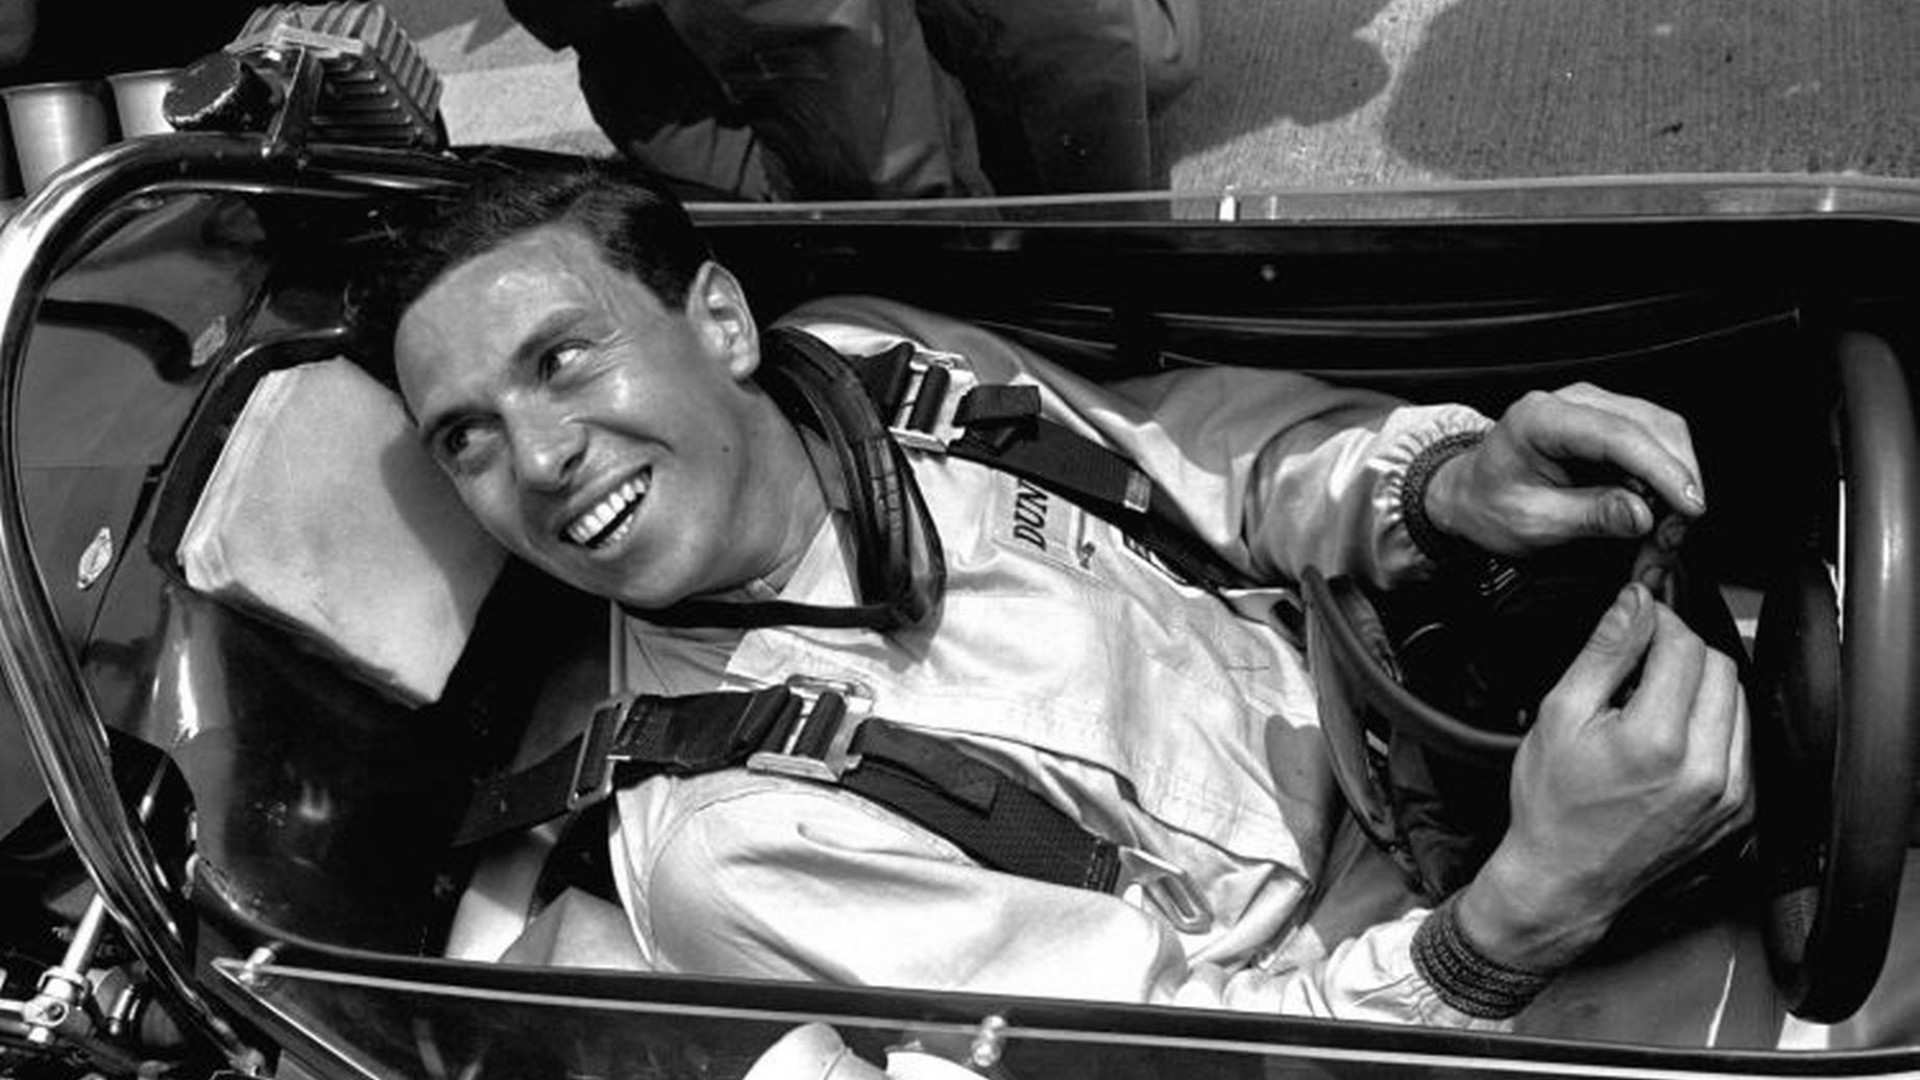 Jim Clark in a file photo. (Image credit: Twitter)